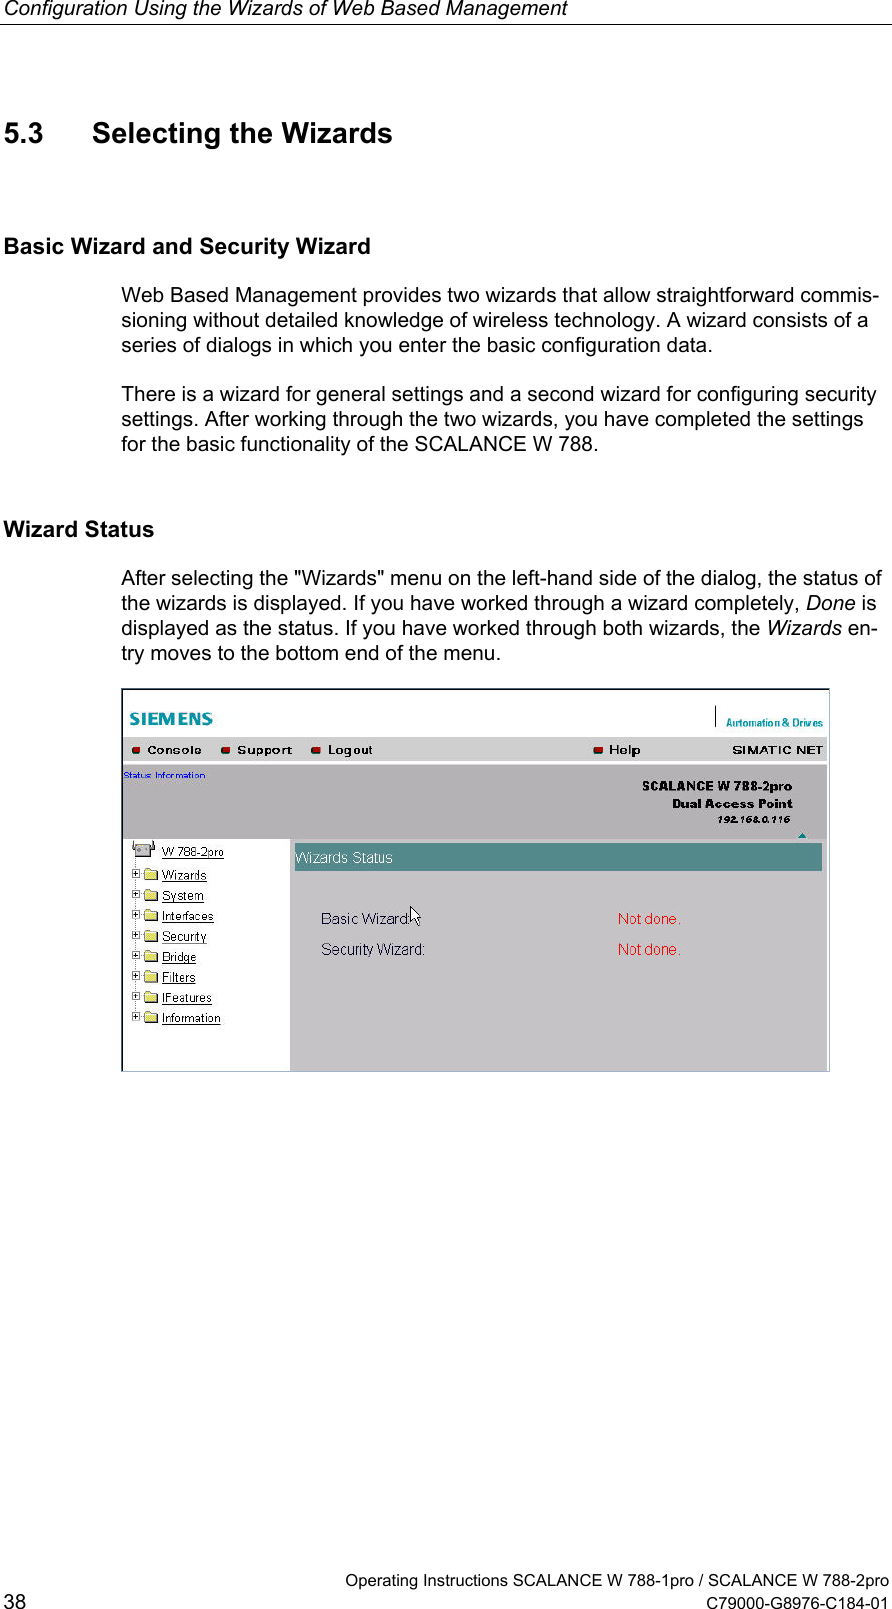 Configuration Using the Wizards of Web Based Management   Operating Instructions SCALANCE W 788-1pro / SCALANCE W 788-2pro 38  C79000-G8976-C184-01 5.3  Selecting the Wizards Basic Wizard and Security Wizard Web Based Management provides two wizards that allow straightforward commis-sioning without detailed knowledge of wireless technology. A wizard consists of a series of dialogs in which you enter the basic configuration data. There is a wizard for general settings and a second wizard for configuring security settings. After working through the two wizards, you have completed the settings for the basic functionality of the SCALANCE W 788. Wizard Status After selecting the &quot;Wizards&quot; menu on the left-hand side of the dialog, the status of the wizards is displayed. If you have worked through a wizard completely, Done is displayed as the status. If you have worked through both wizards, the Wizards en-try moves to the bottom end of the menu.   